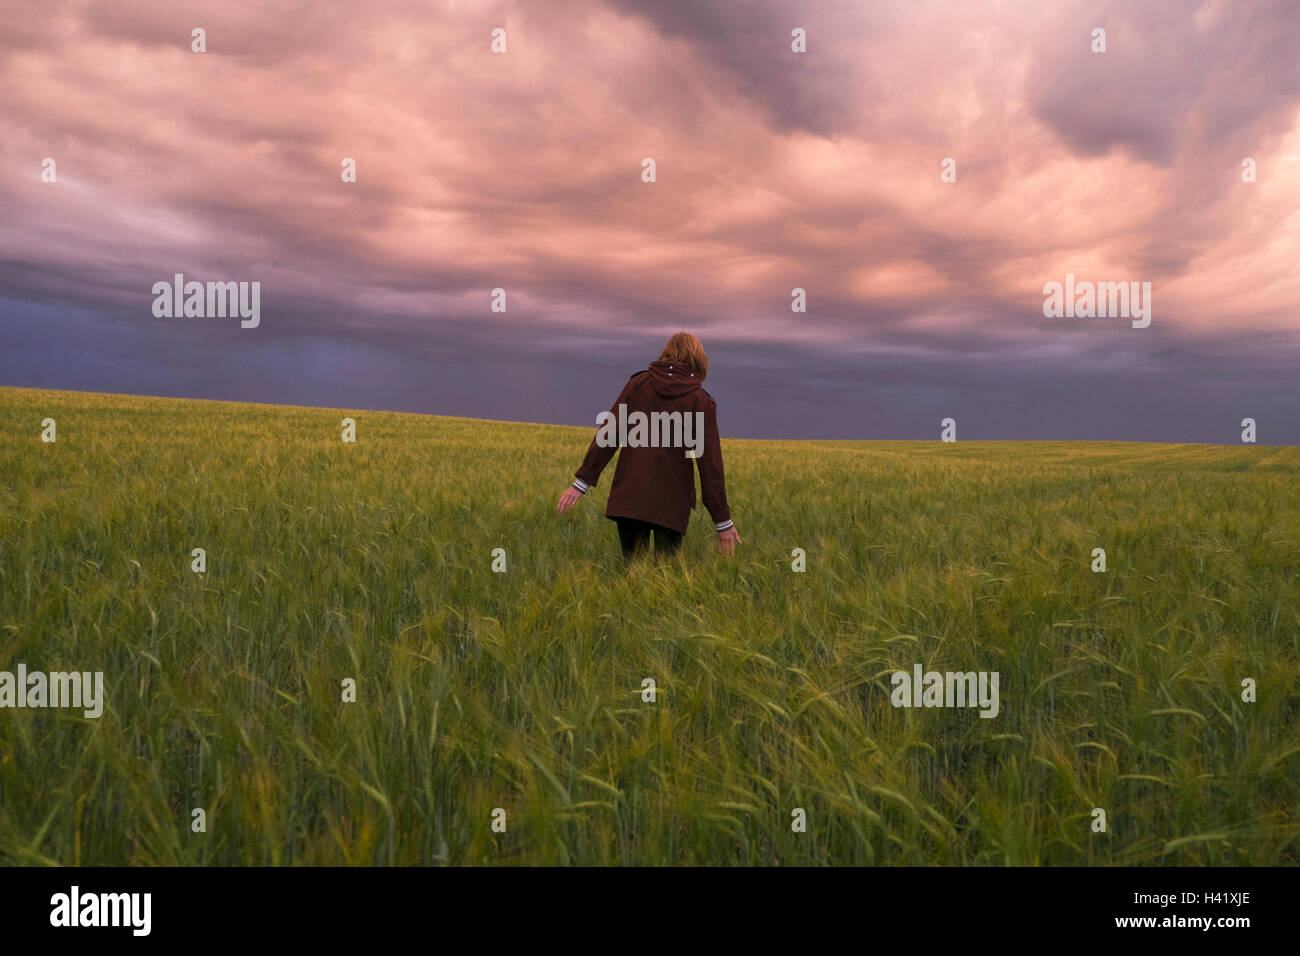 Storm clouds over Caucasian woman walking in field of tall grass Banque D'Images